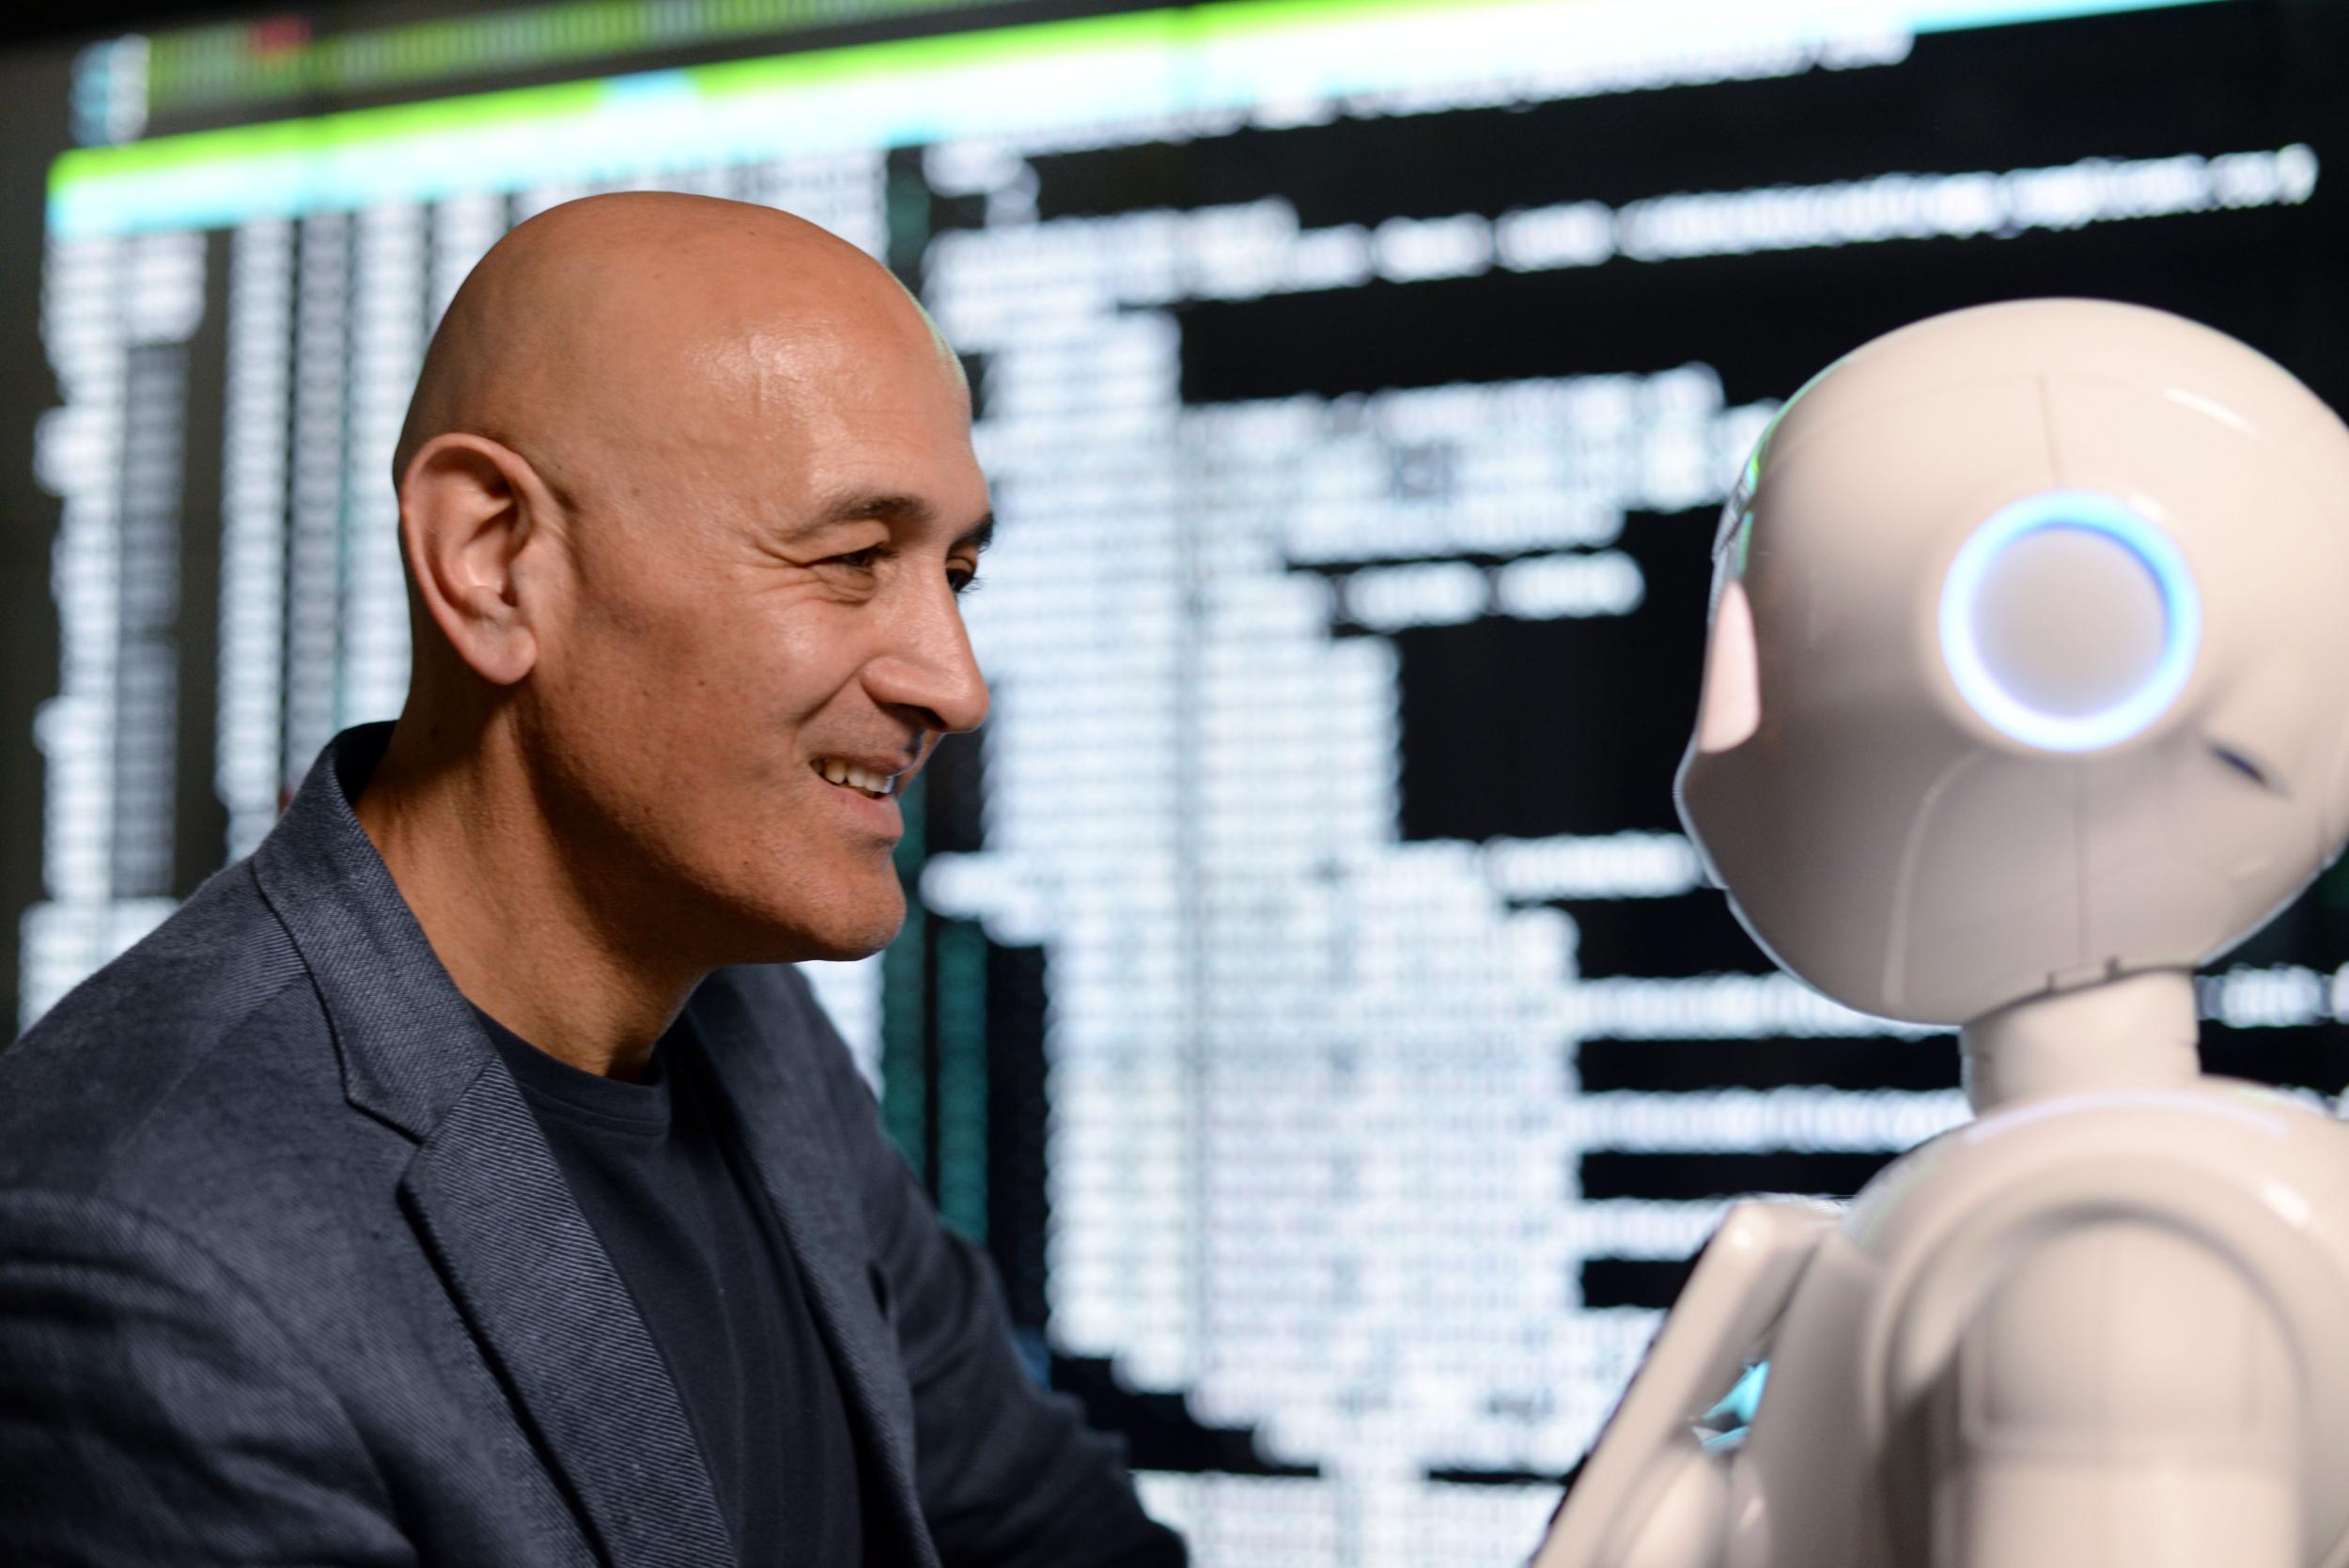 Automatic for the people: Professor Jim Al-Khalili converses with an AI-equipped robot